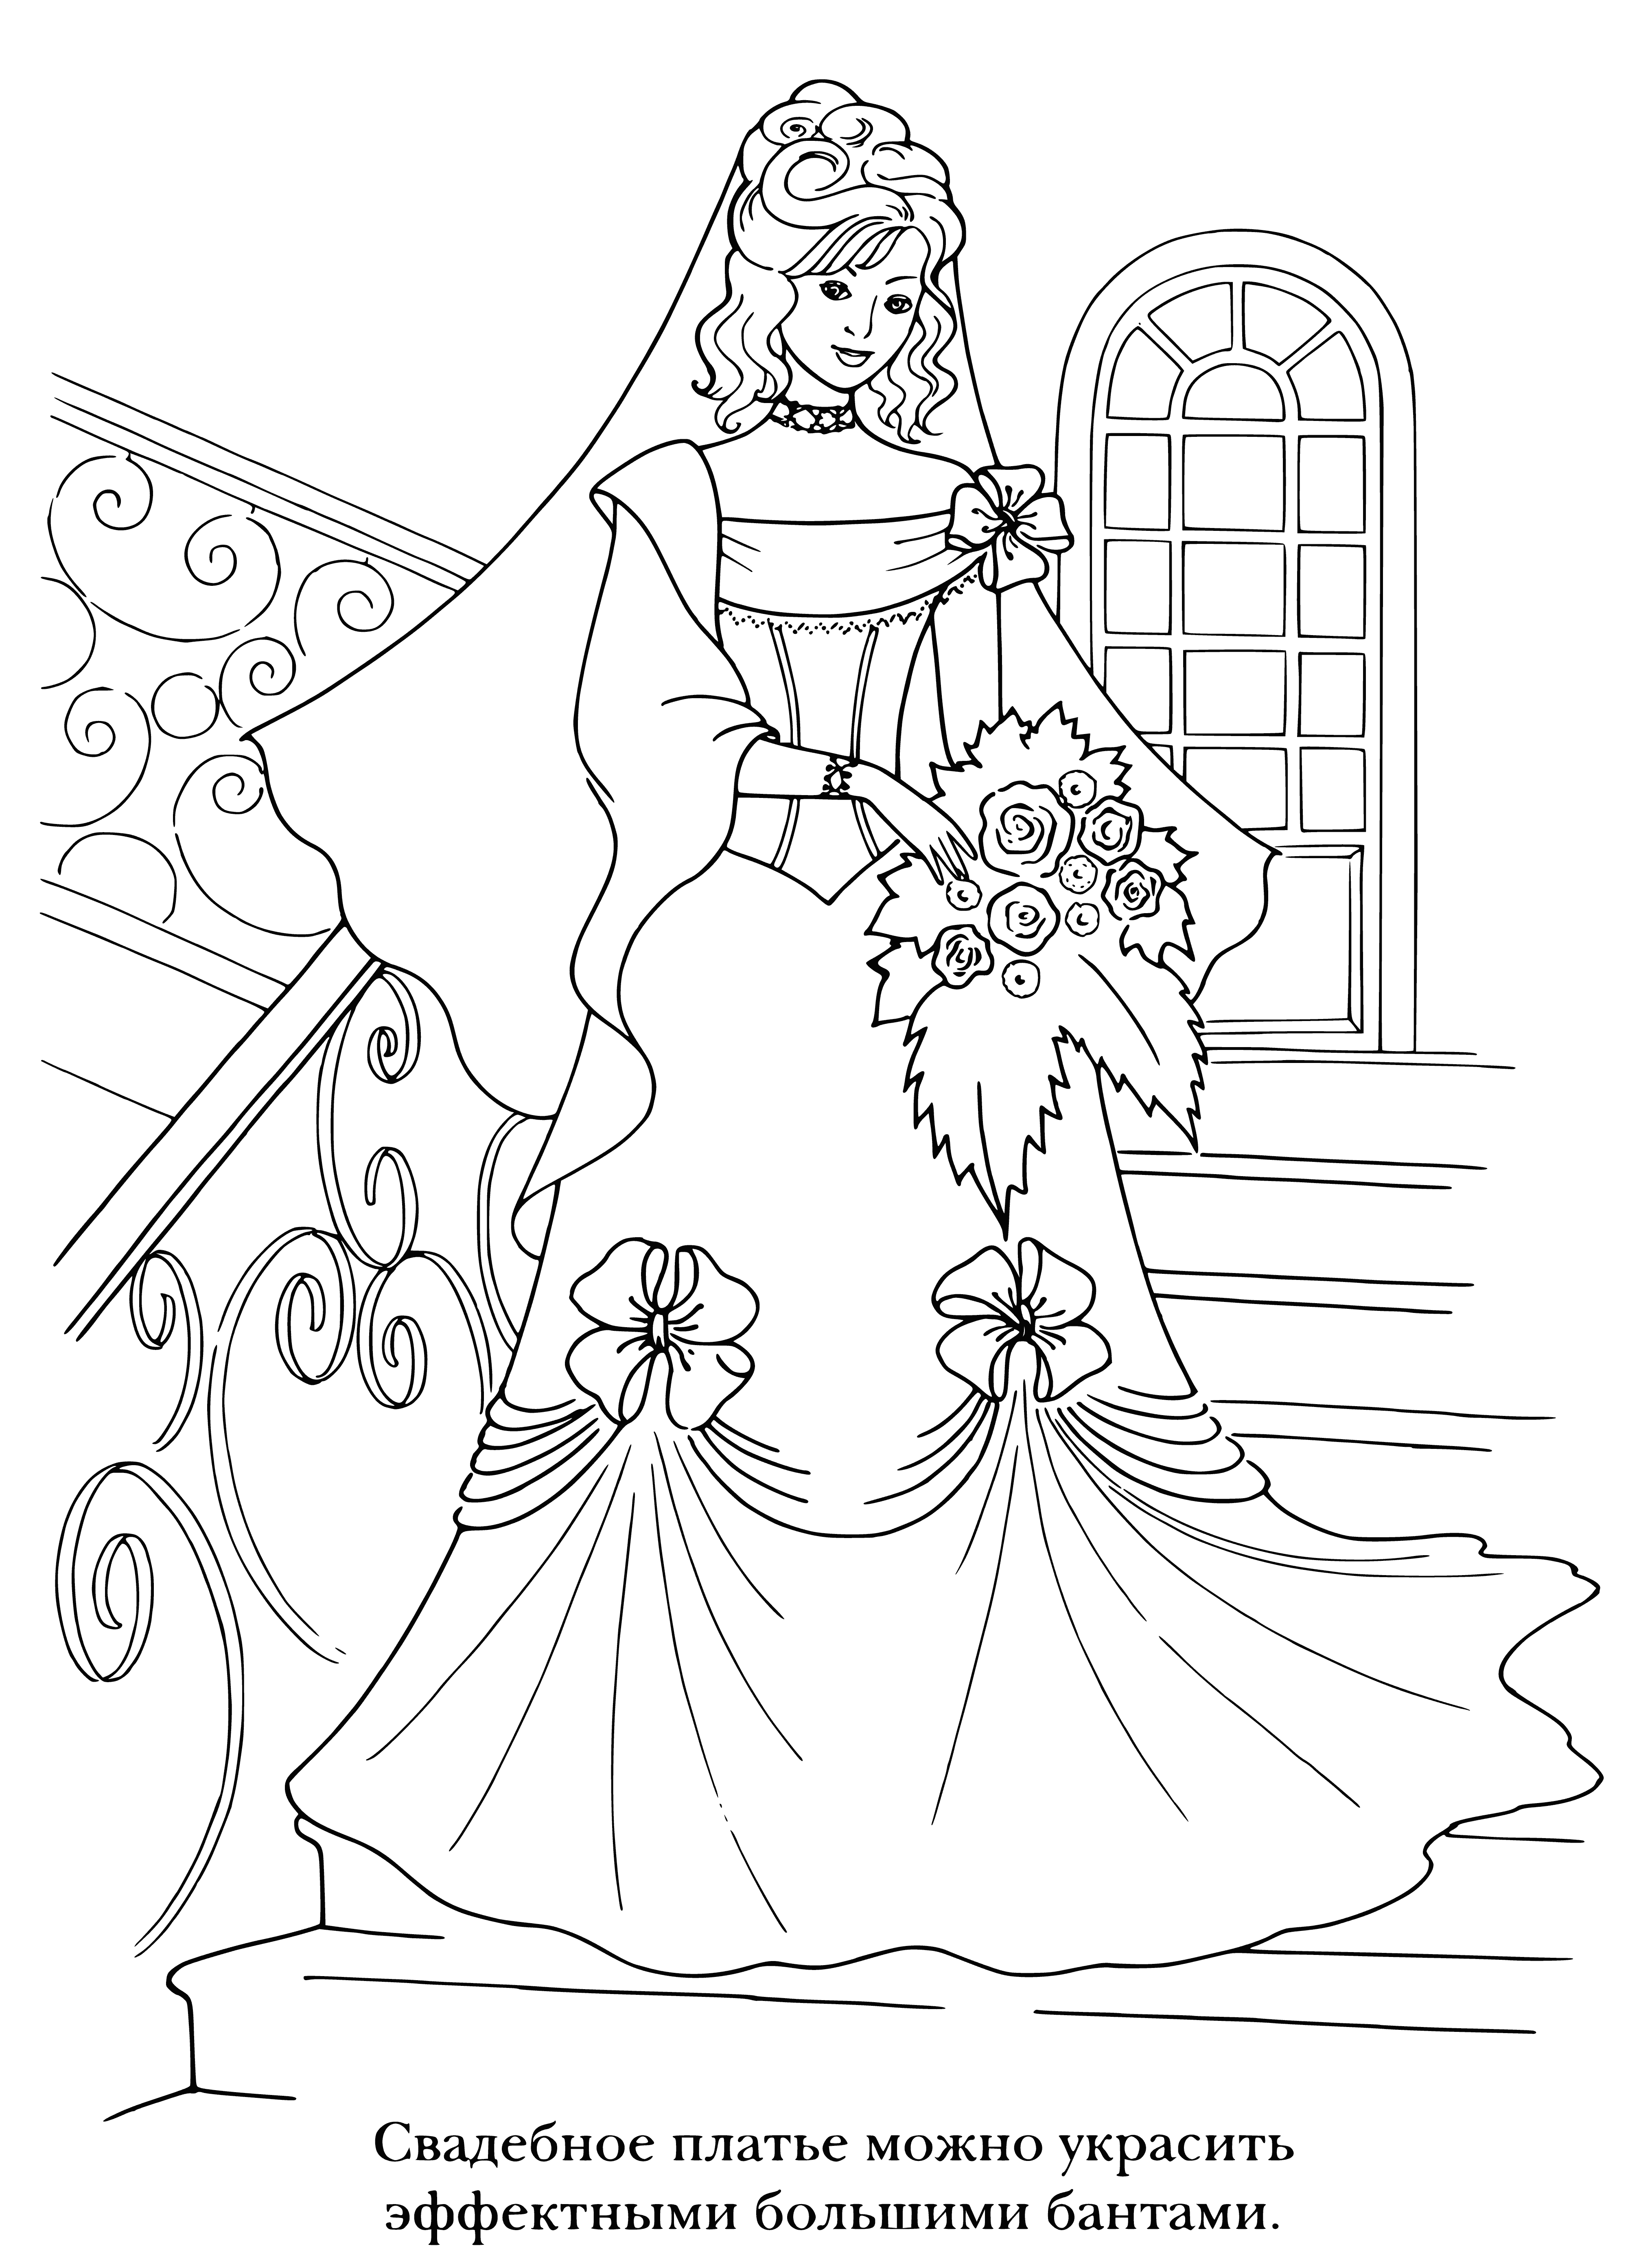 coloring page: A bride stands on a staircase, smiling in a beautiful dress, veil, & bouquet--ready to make lifelong memories!